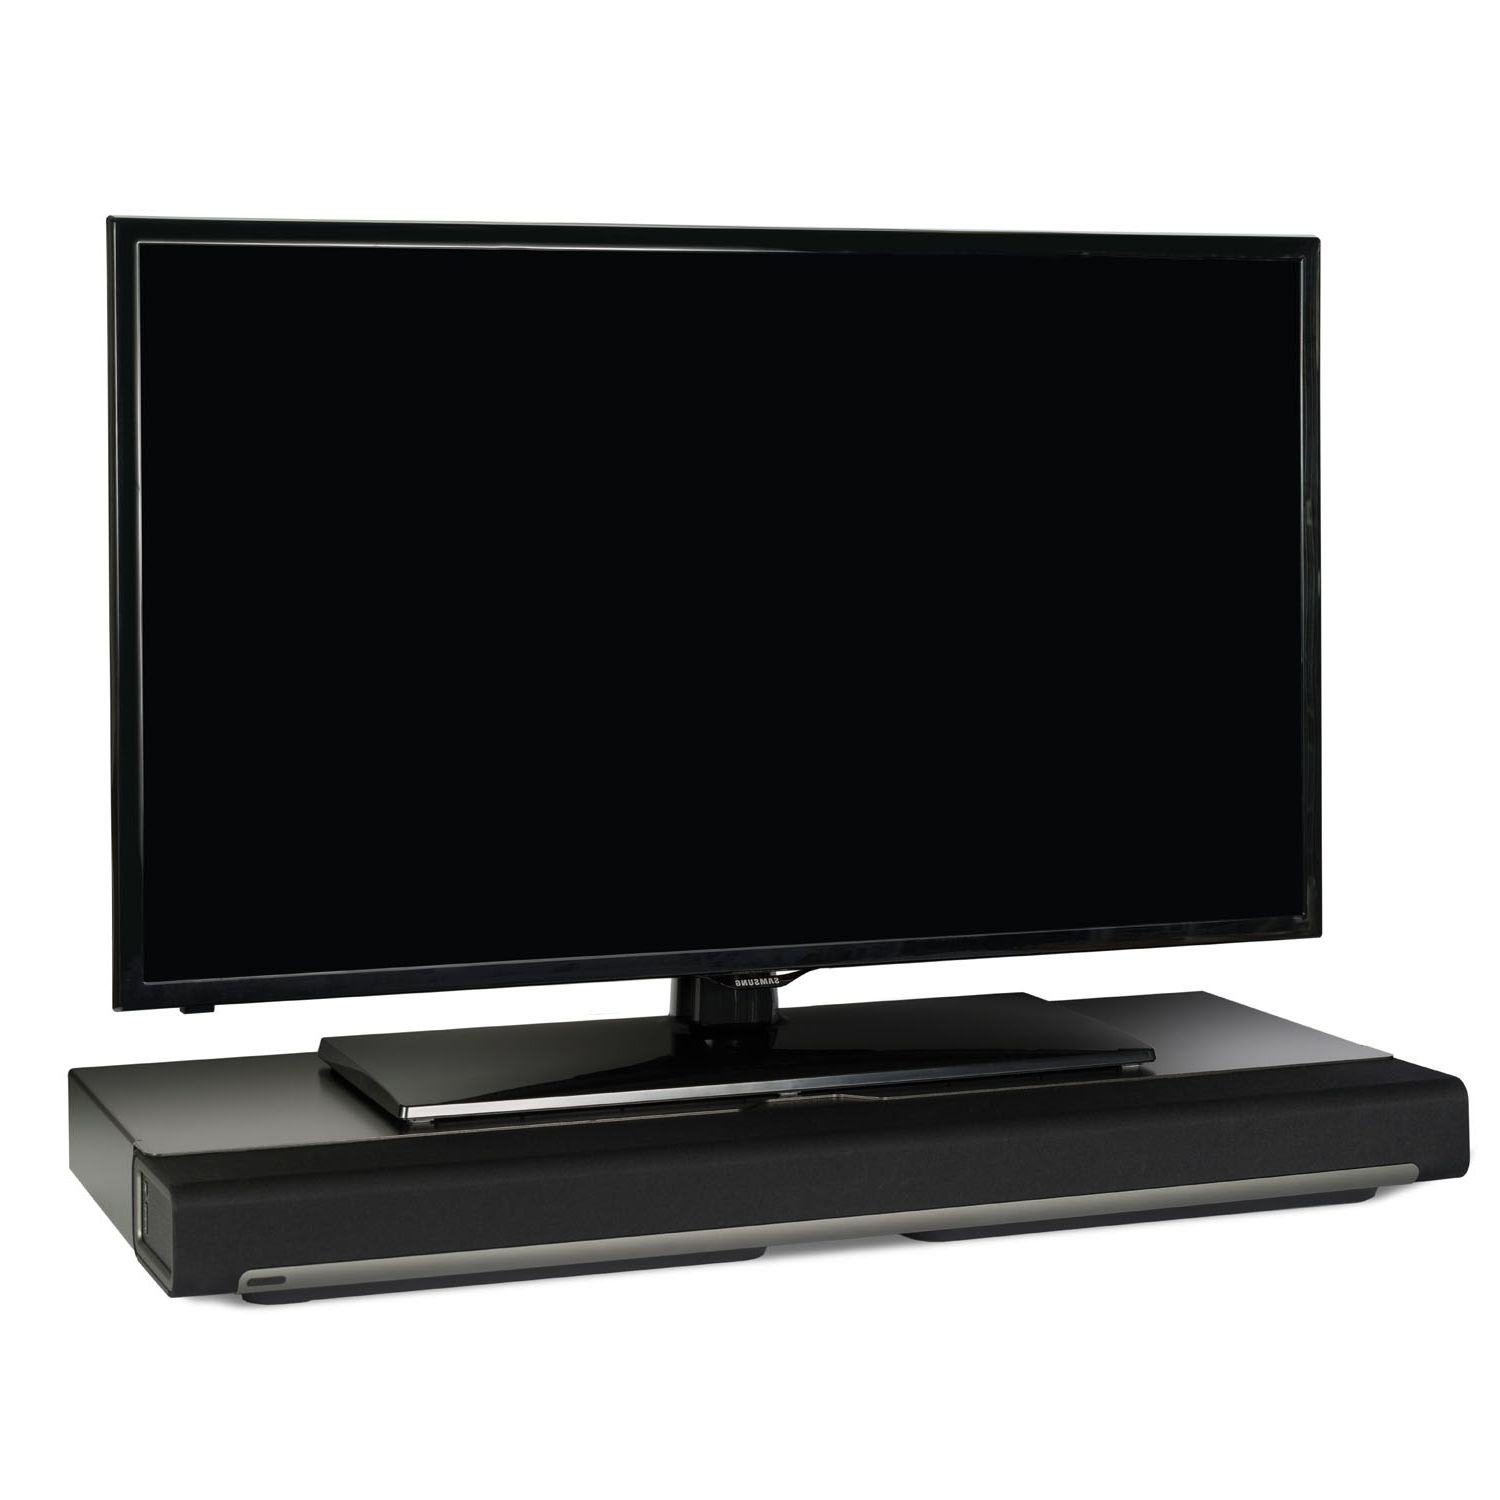 Fashionable Sonos Tv Stands For Flexson Tv Stand For Sonos Playbar – Black (single) – Tv Mounts (View 1 of 20)